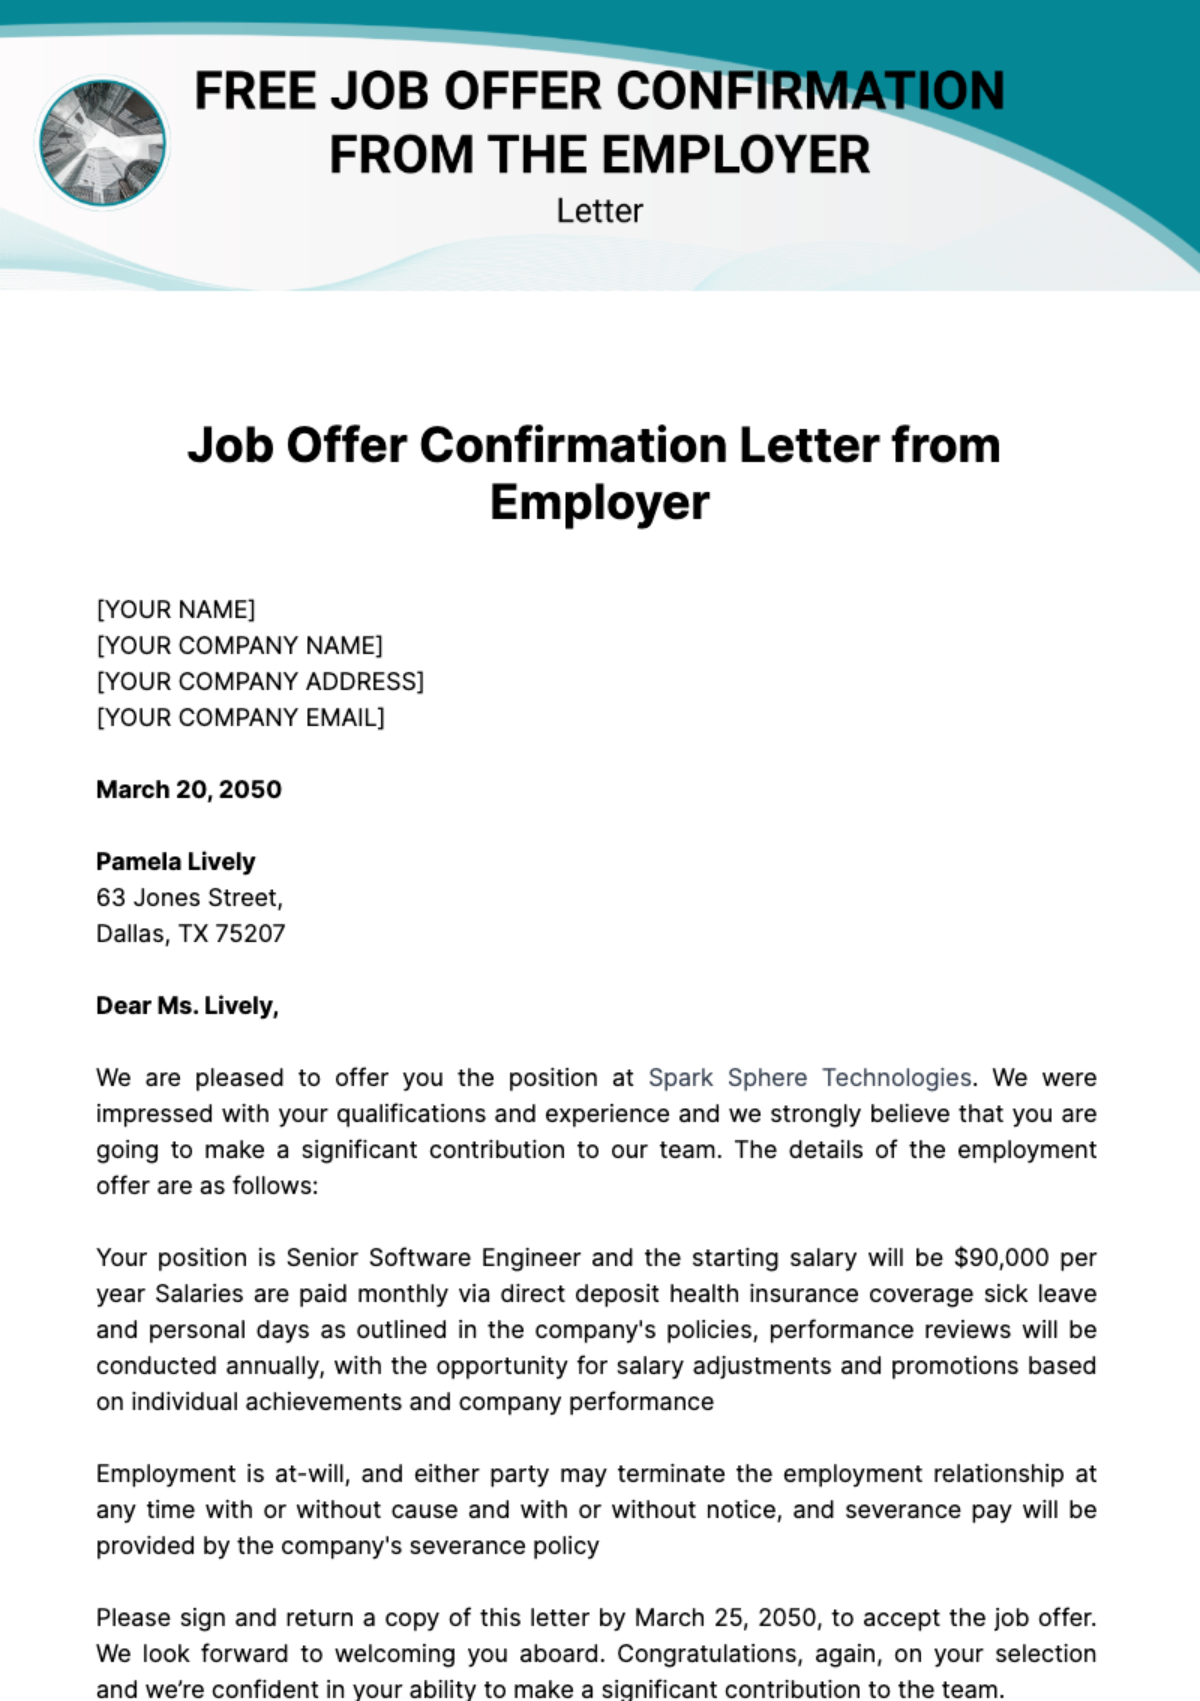 Free Job Offer Confirmation Letter from Employer Template